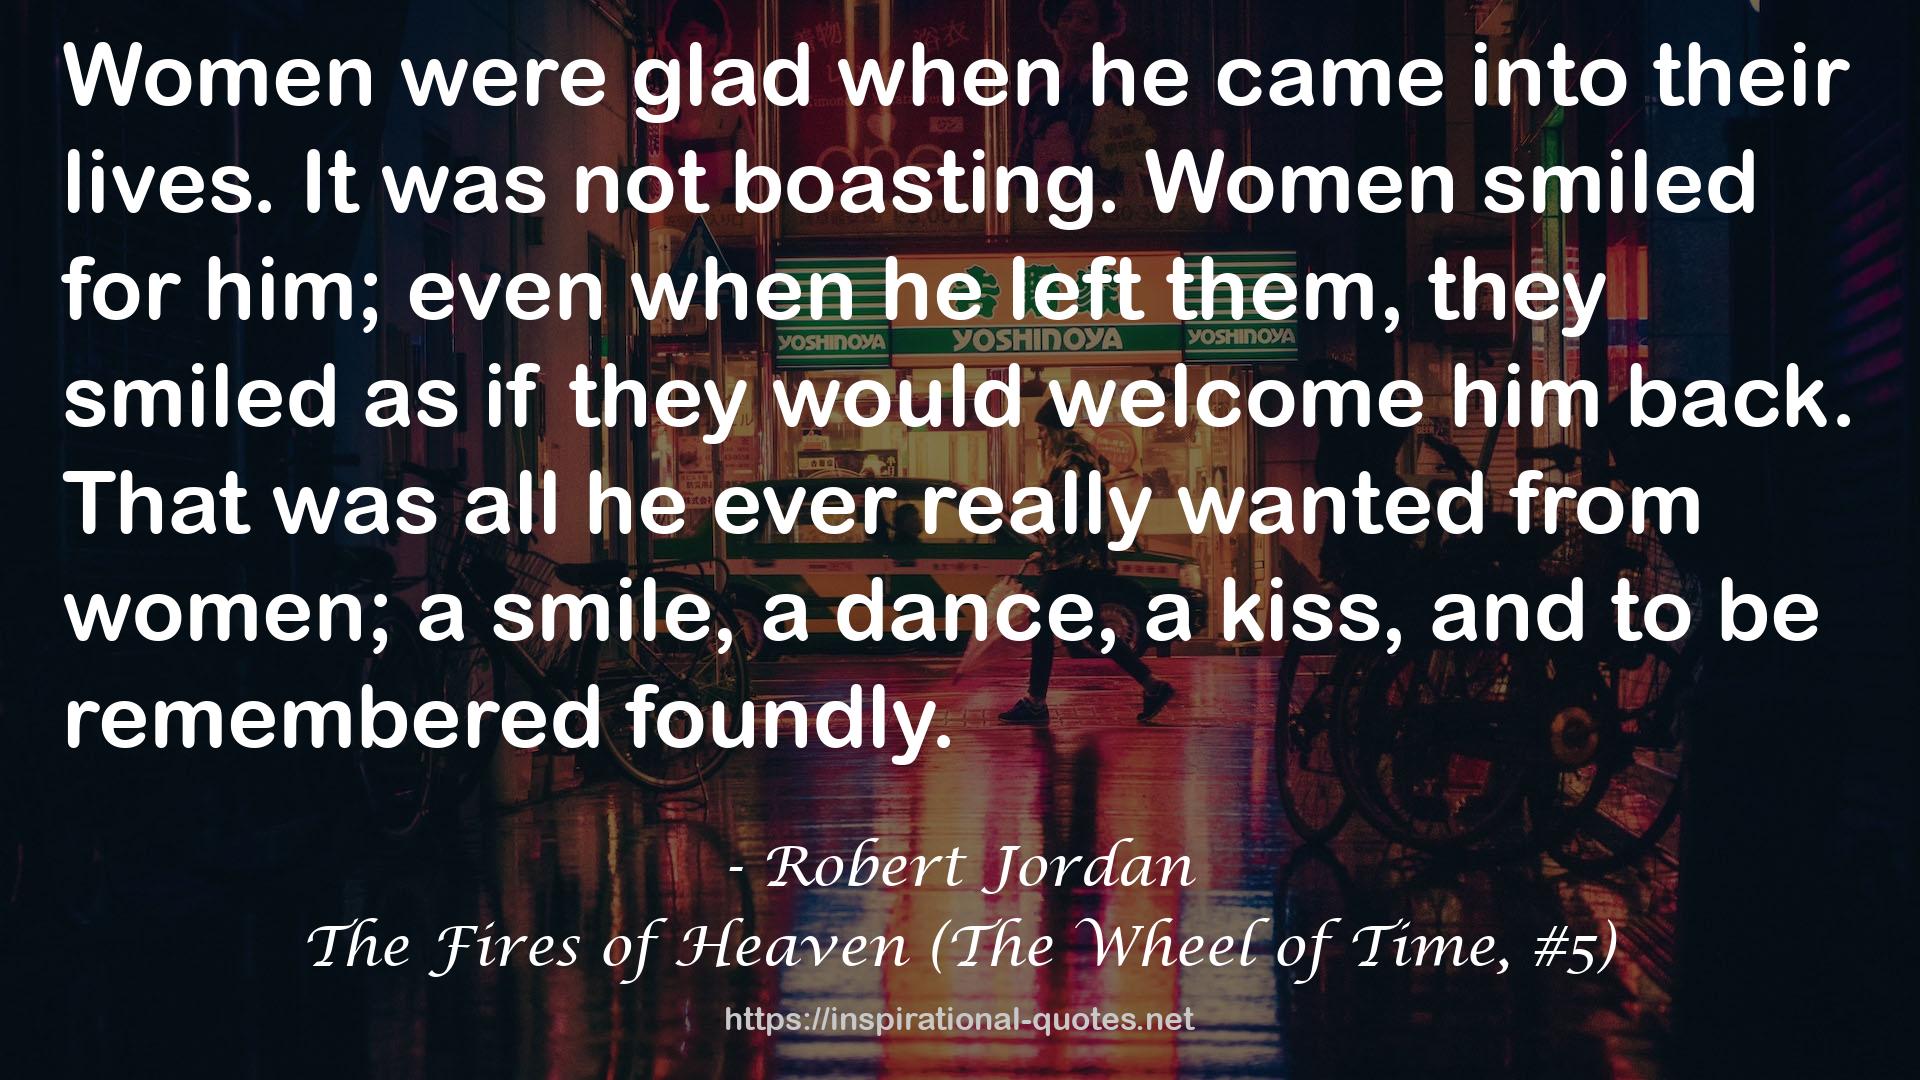 The Fires of Heaven (The Wheel of Time, #5) QUOTES